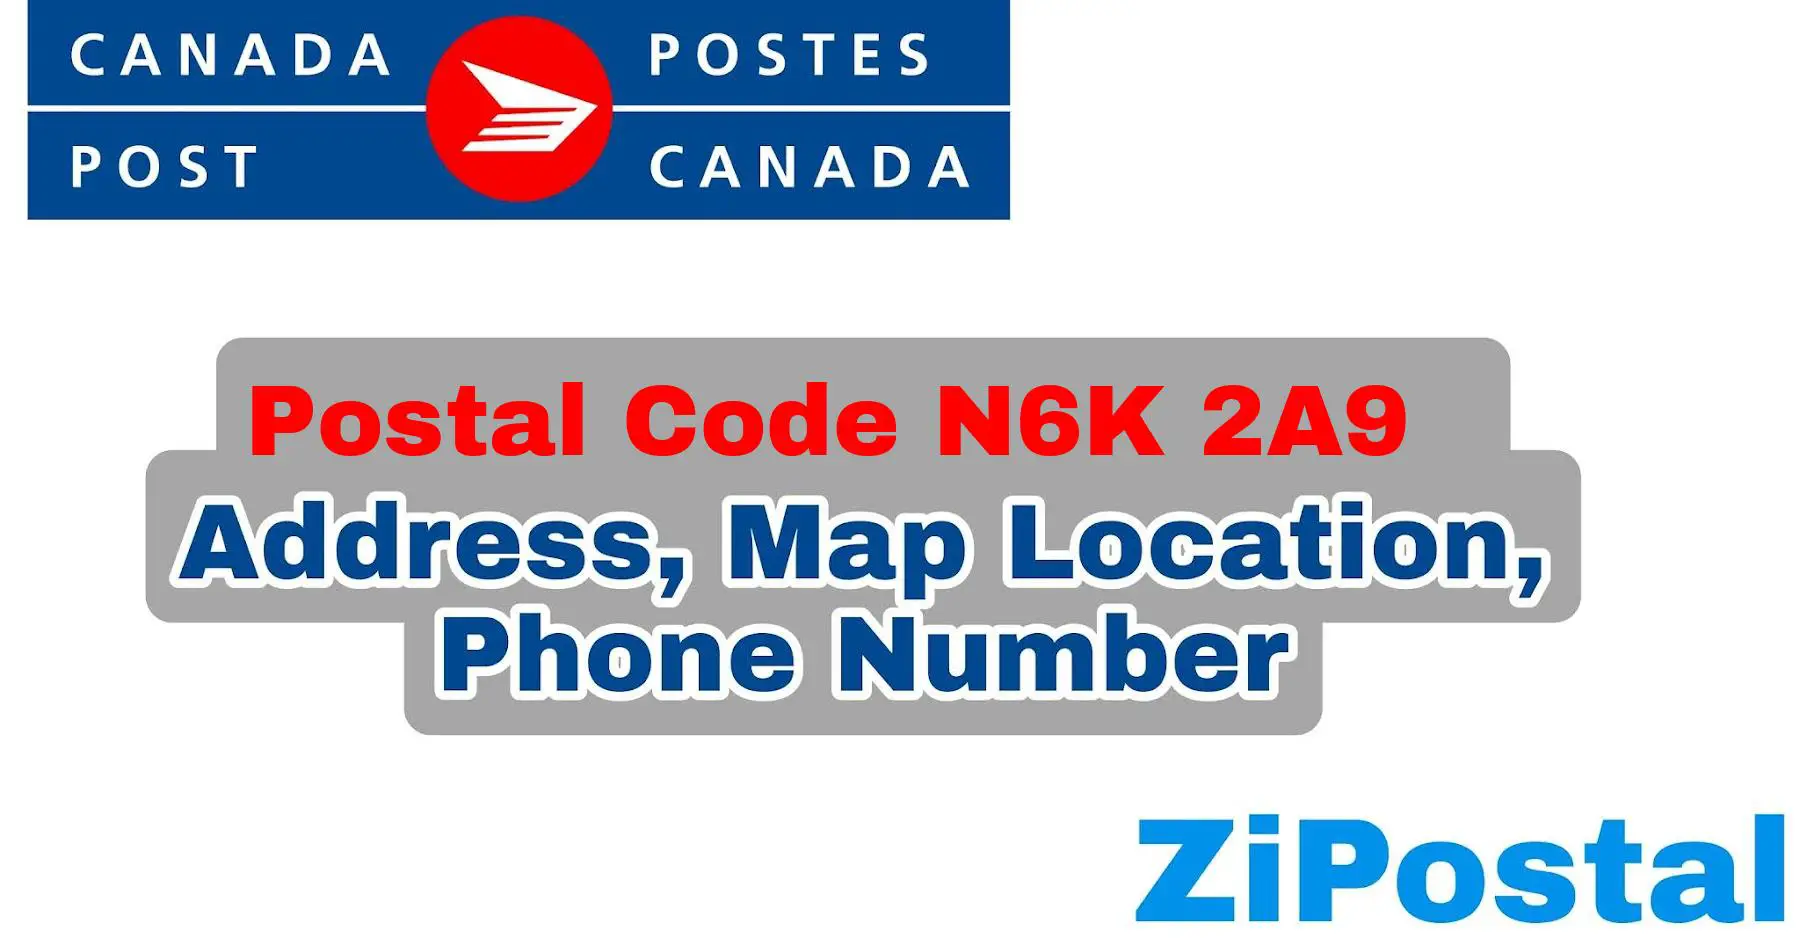 Postal Code N6K 2A9 Address Map Location and Phone Number